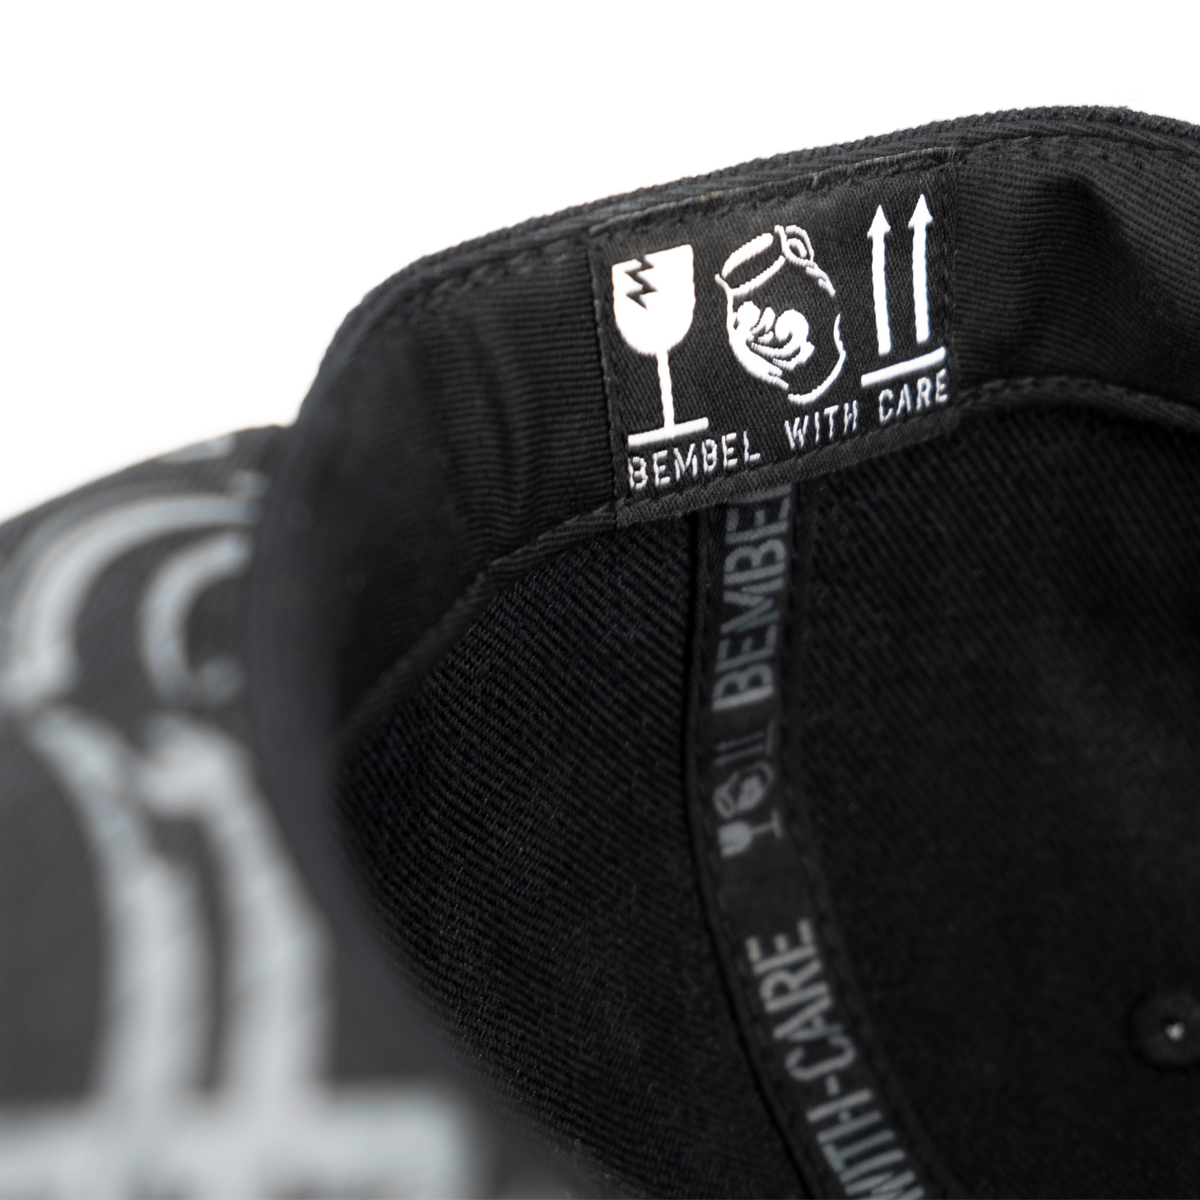 BEMBEL-WITH-CARE Snapback Detail Hutband mit Label, Apfelwein, Cider